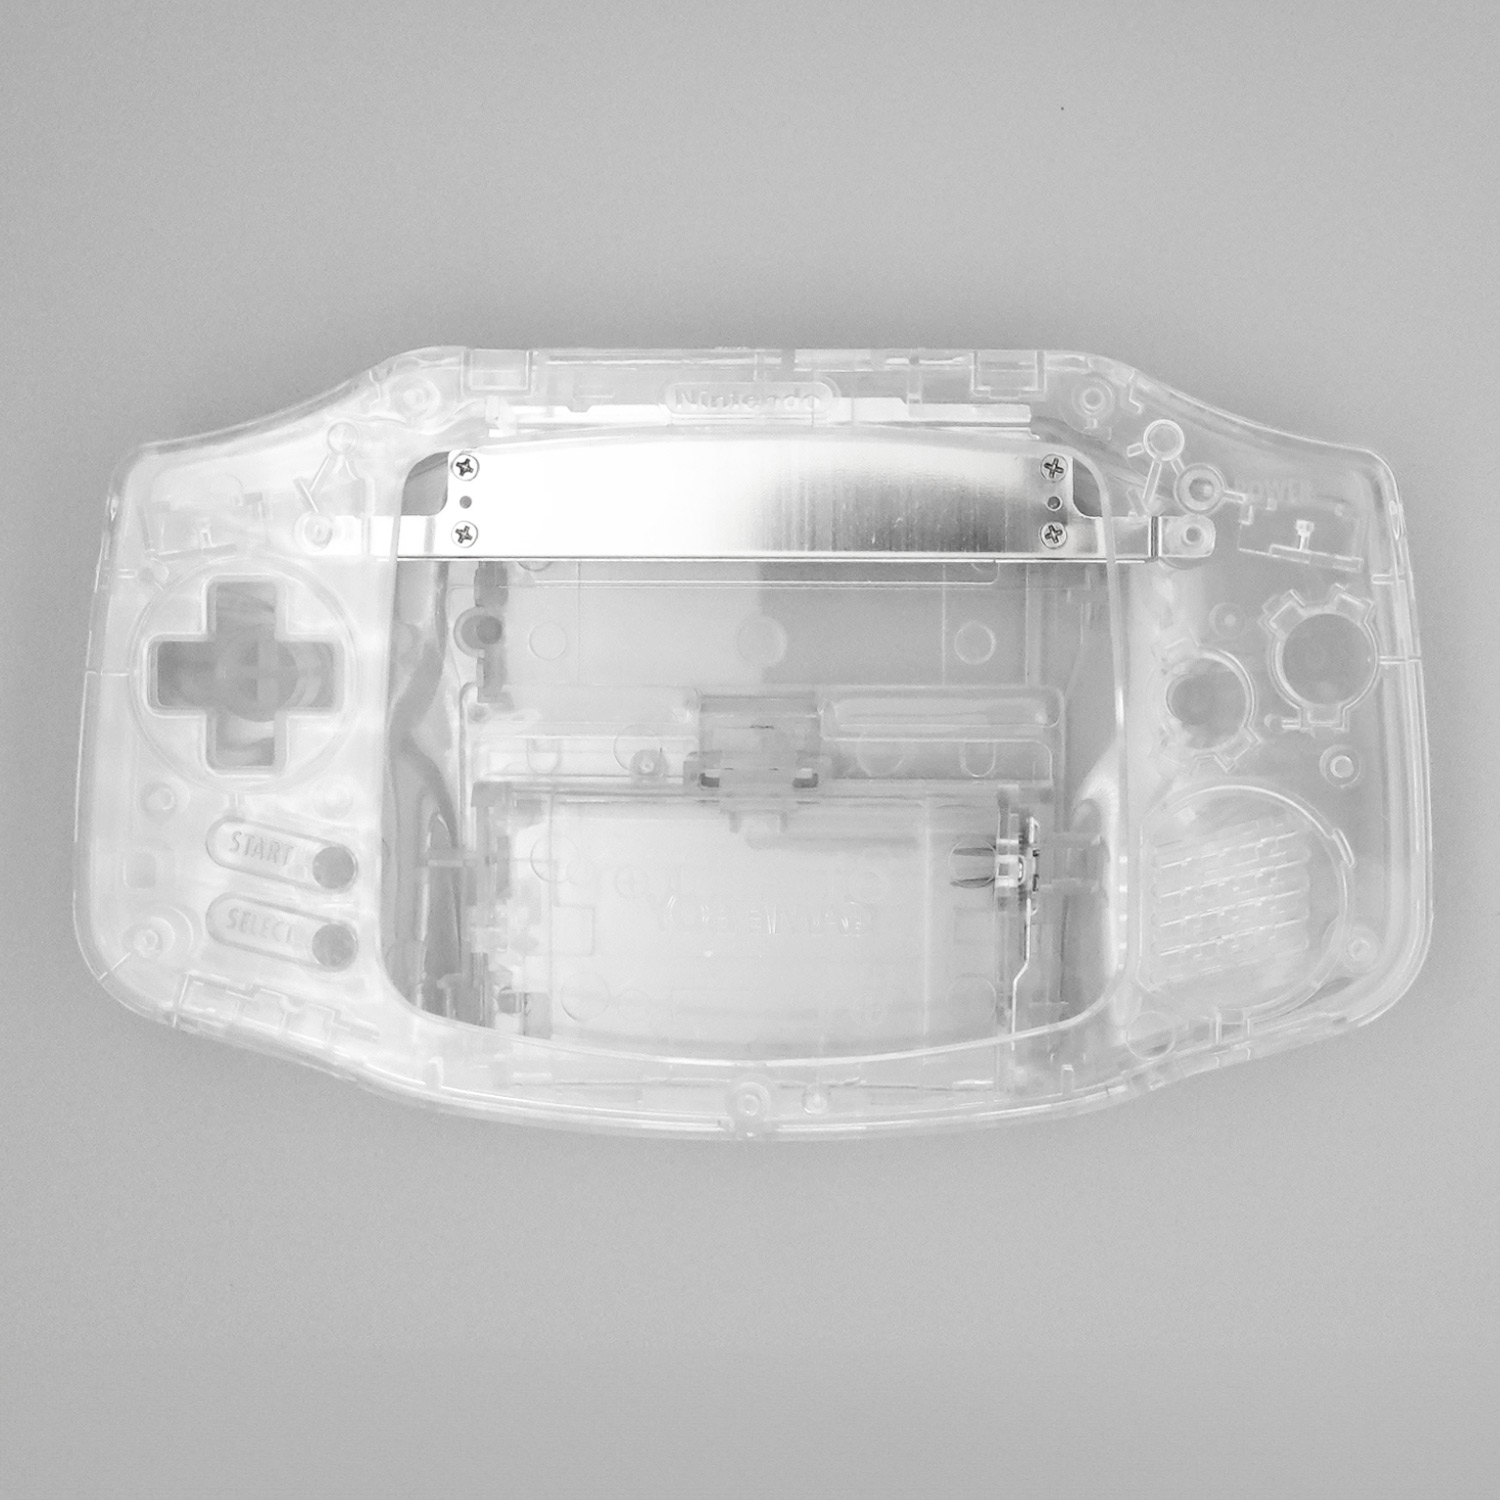 Game Boy Advance Special Shell (Mirror Clear)